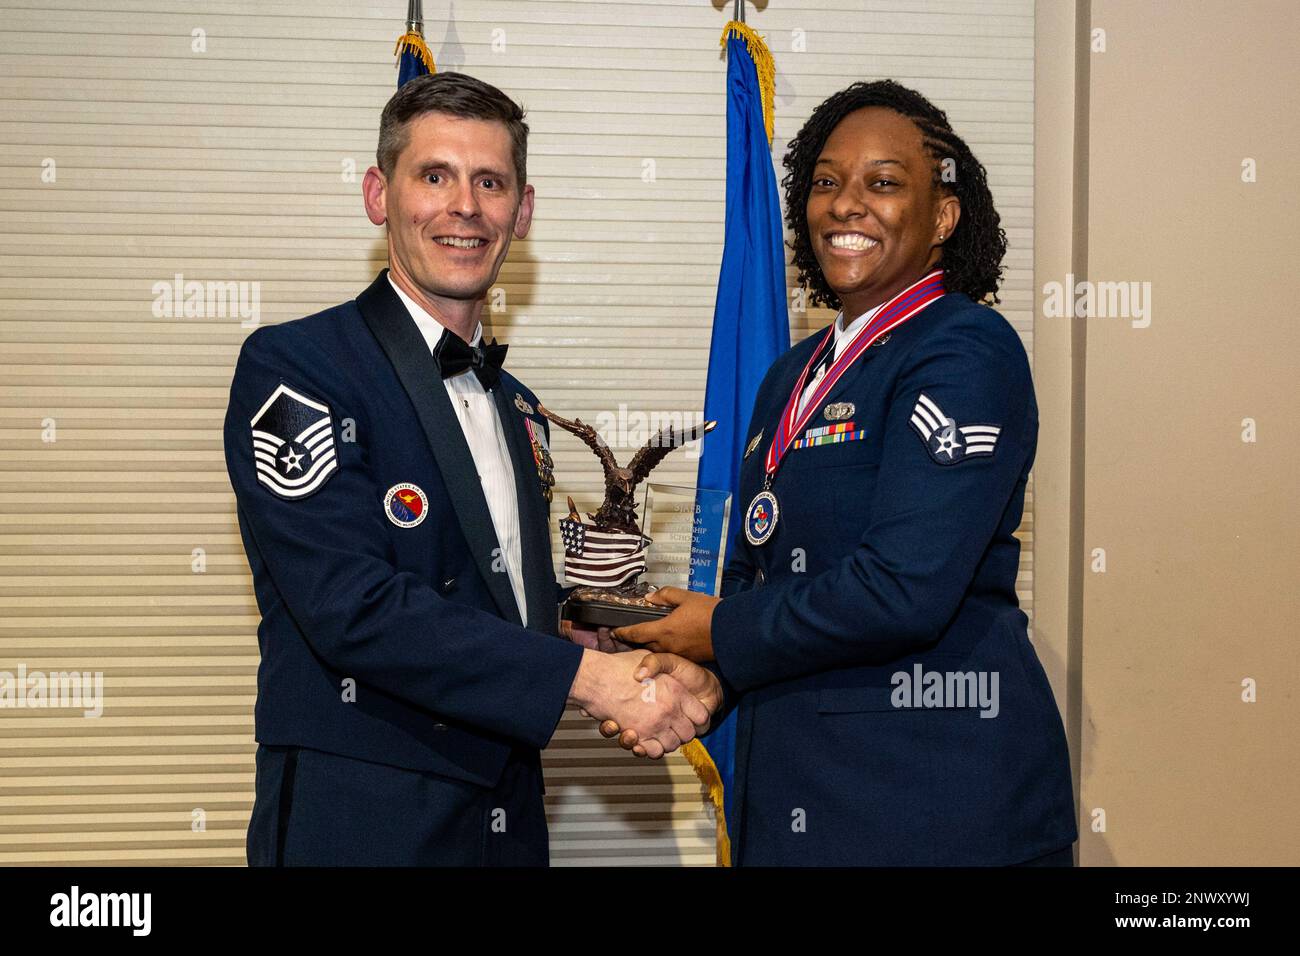 Senior Airman Shartavia Oaks, 4th Security Forces Squadron investigator, right, receives the commandant’s award from Master Sergeant Brandin Wendt, Airman Leadership School commandant, during ALS class 23-B graduation ceremony at Seymour Johnson Air Force Base, North Carolina, Feb. 9, 2023. The commandant’s award was given to the Airman in an ALS class that possesses the highest degree of character, competence and commitment. Stock Photo